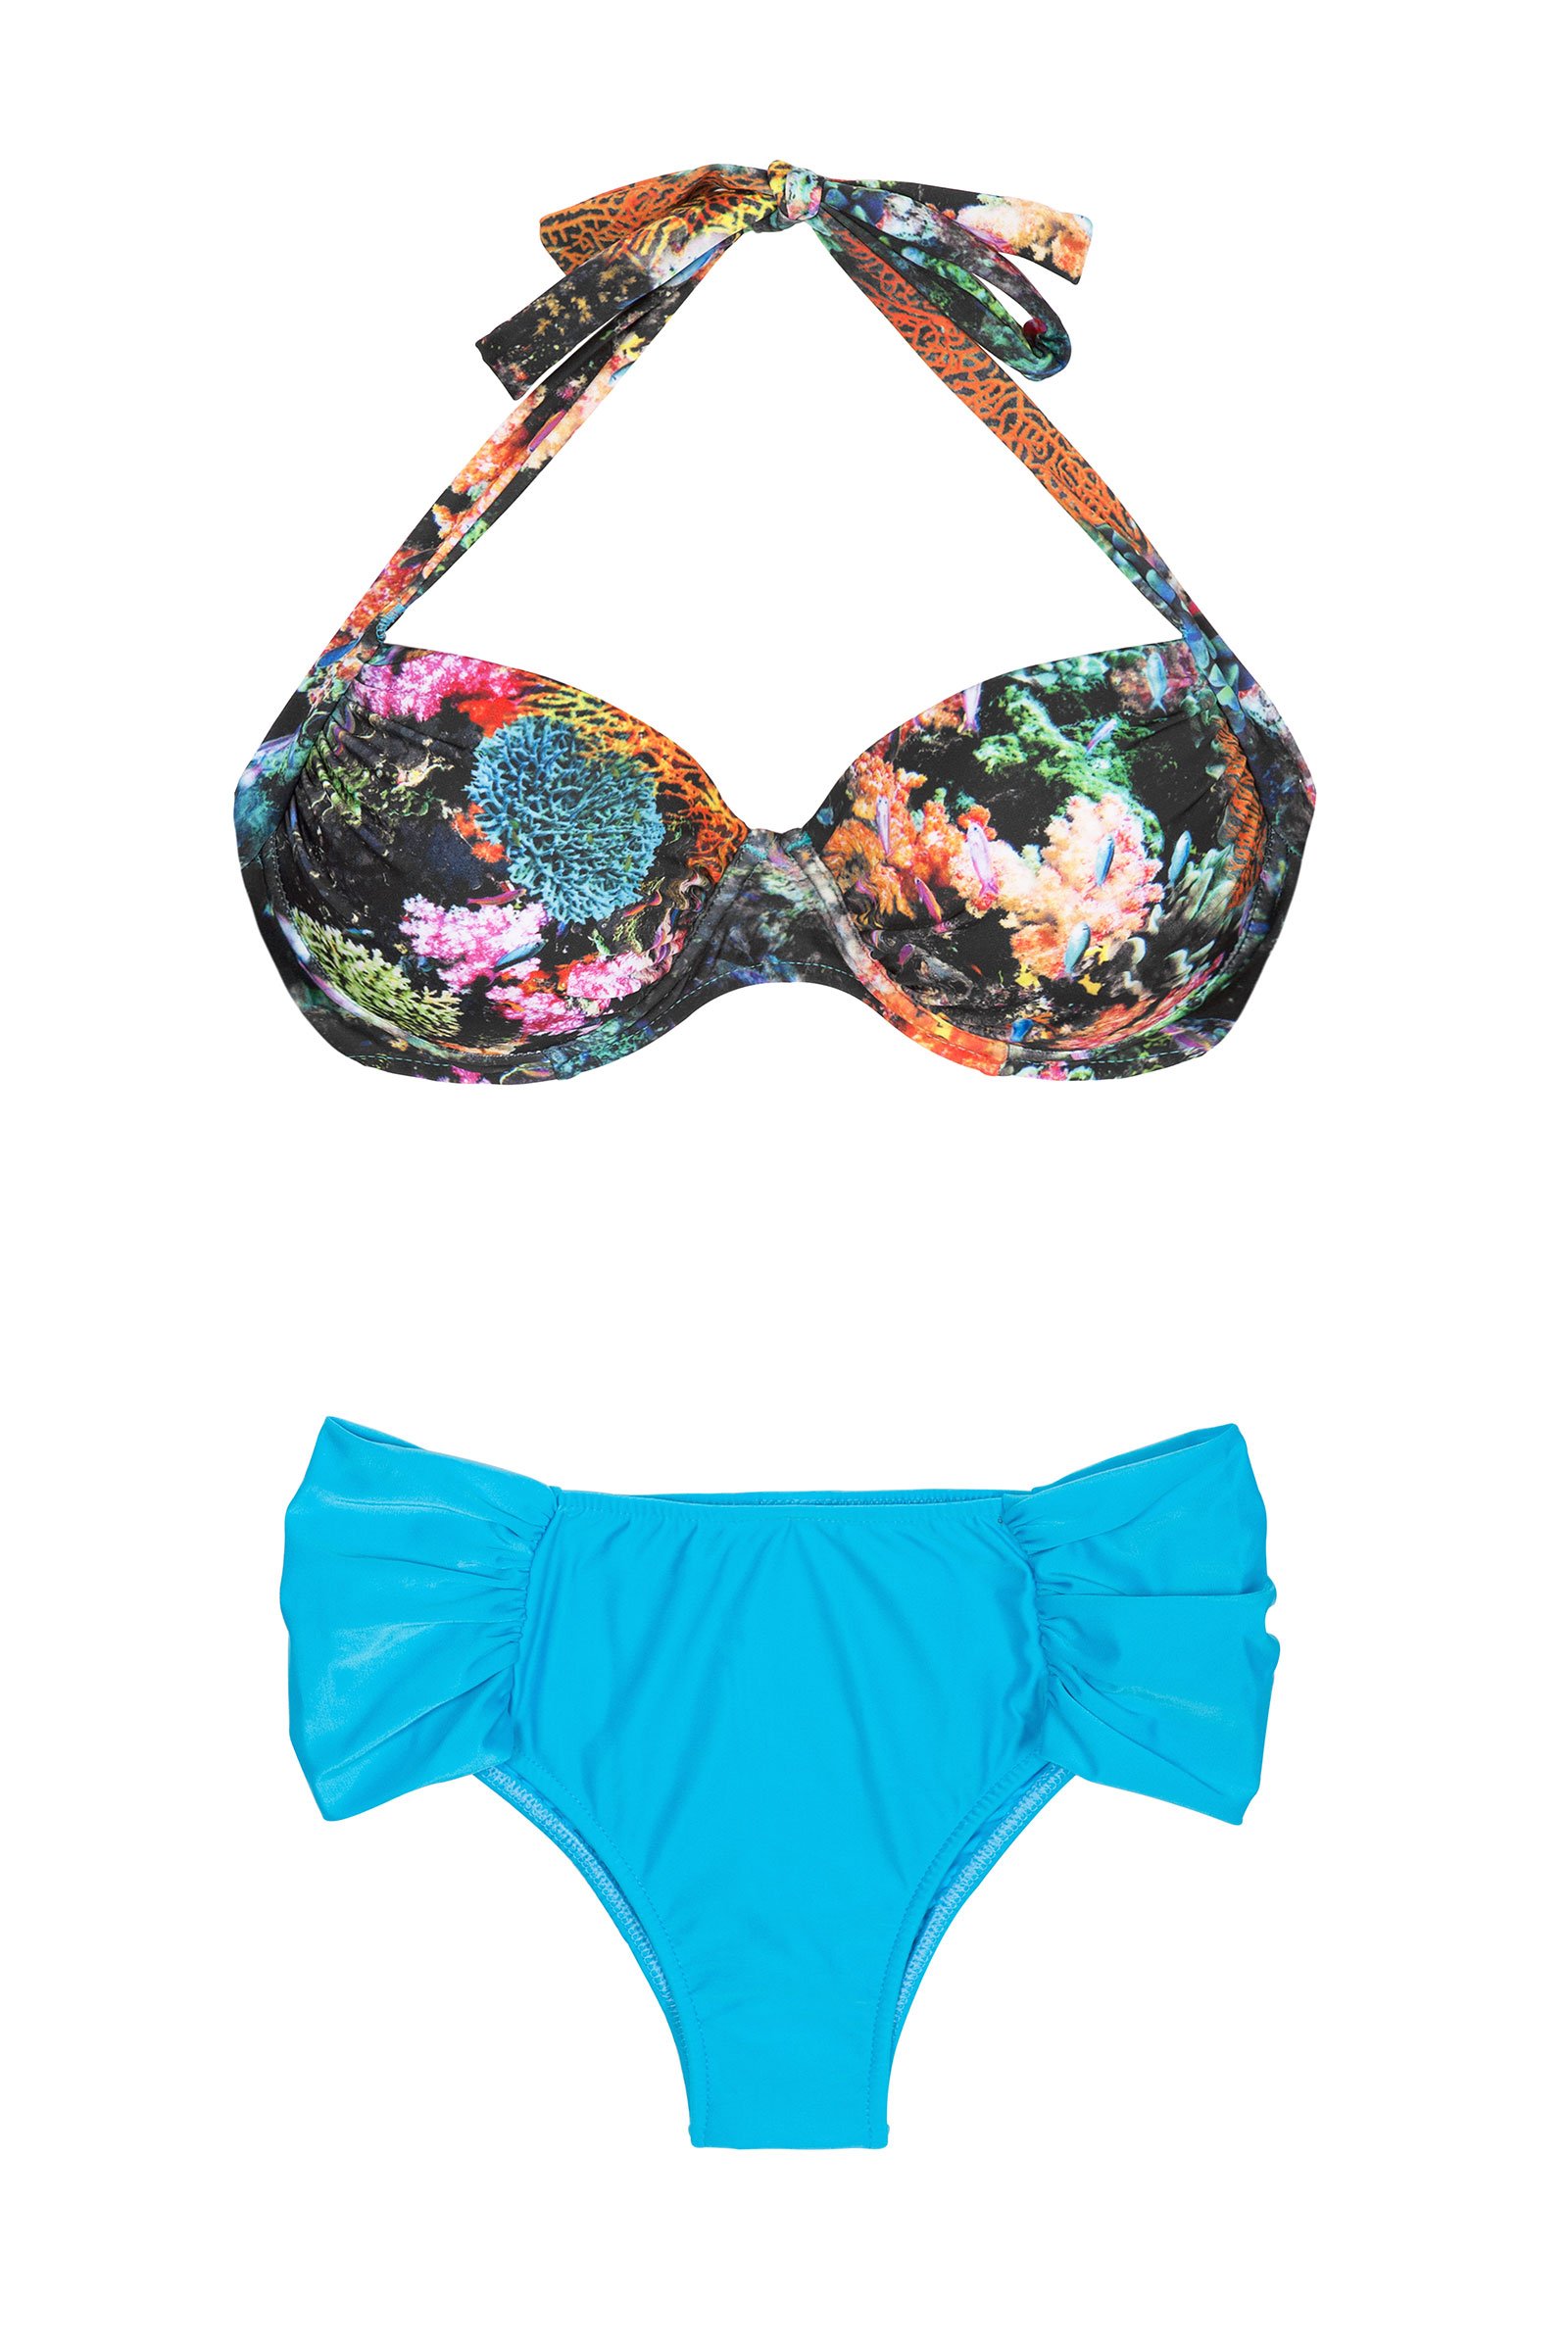 Plus Size Bikini With Printed Balconette Top And Solid Blue Bottom ...